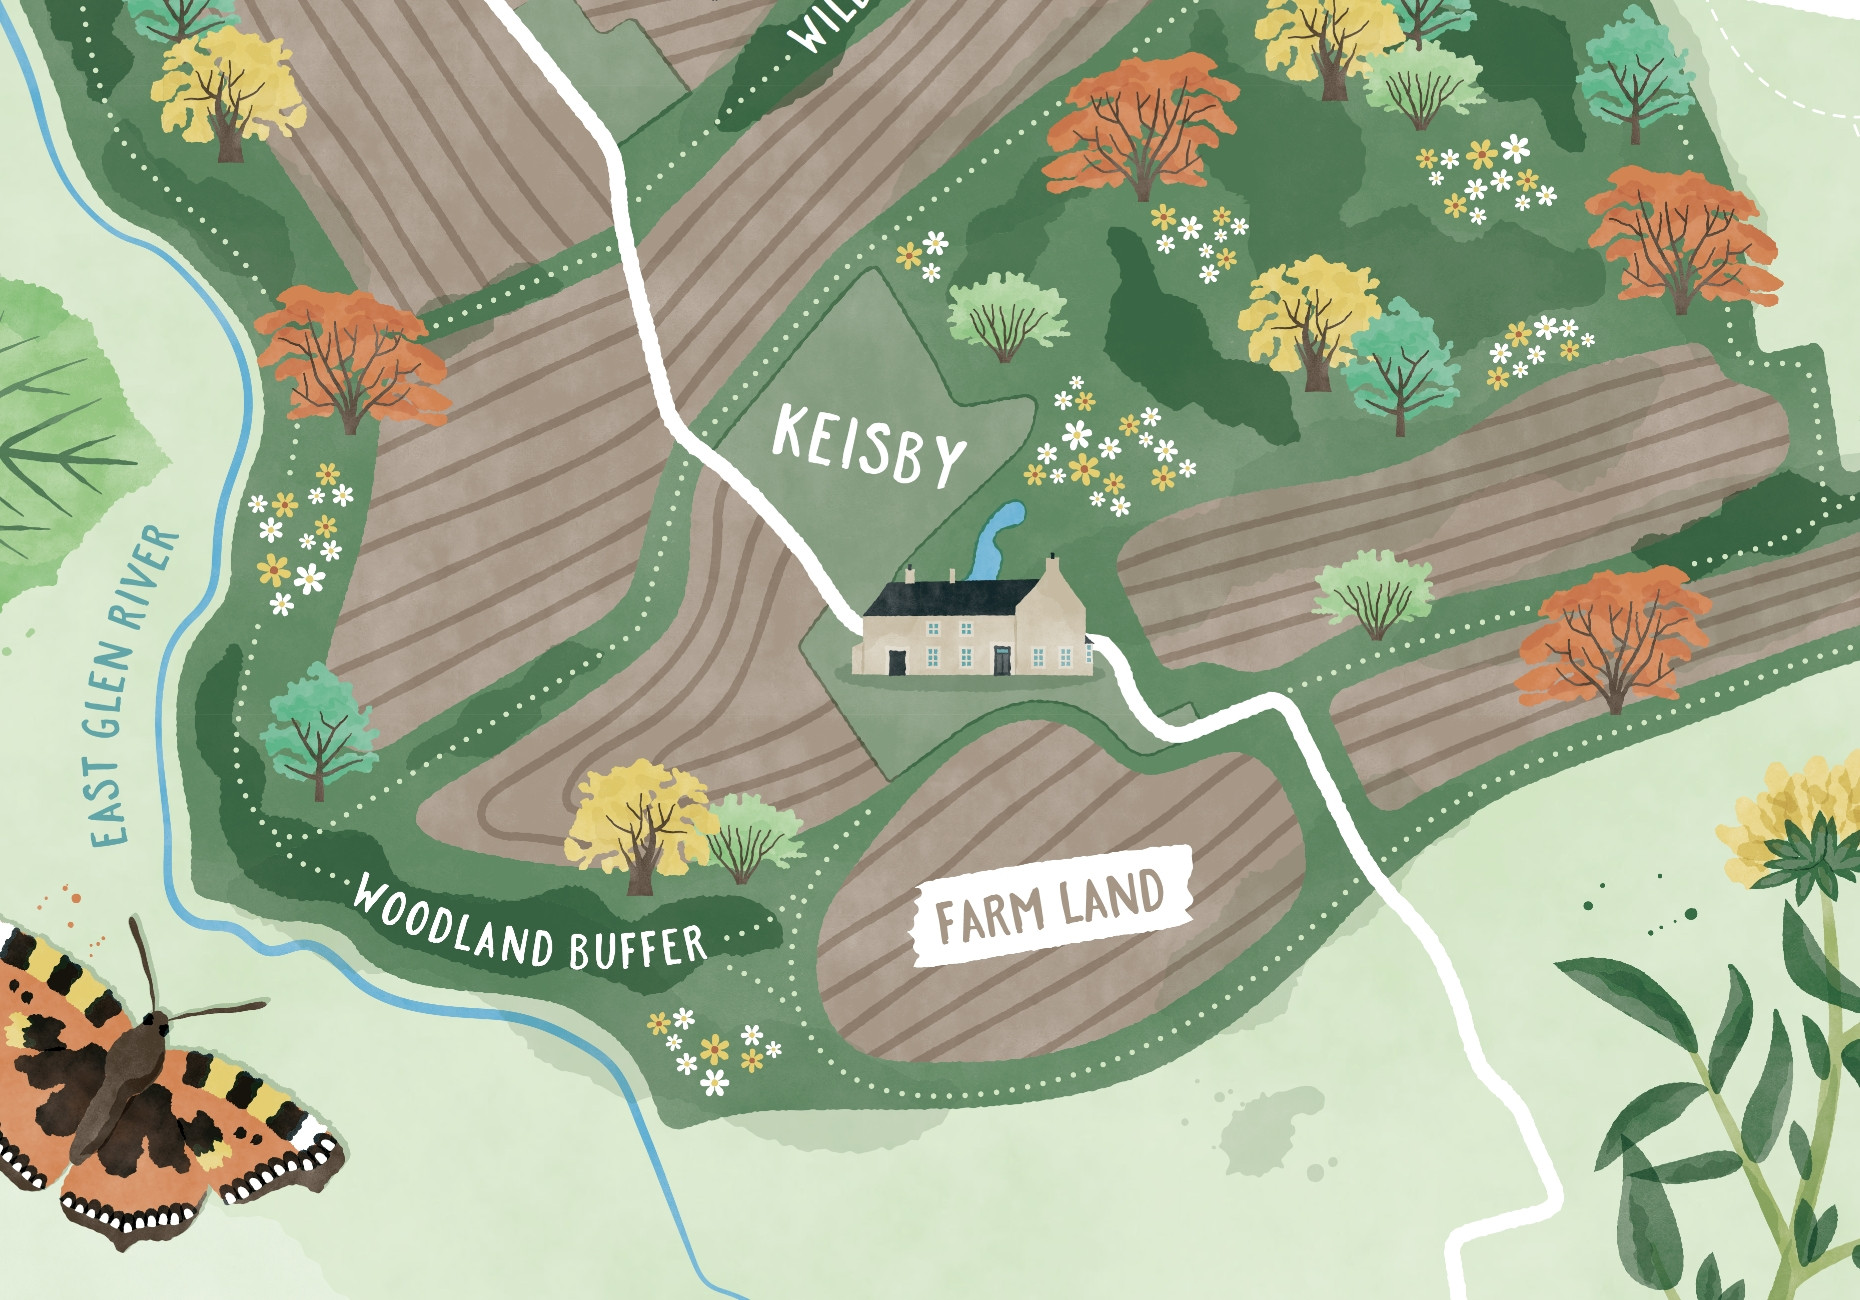 Estate farm countryside illustrated map design by Root Studio